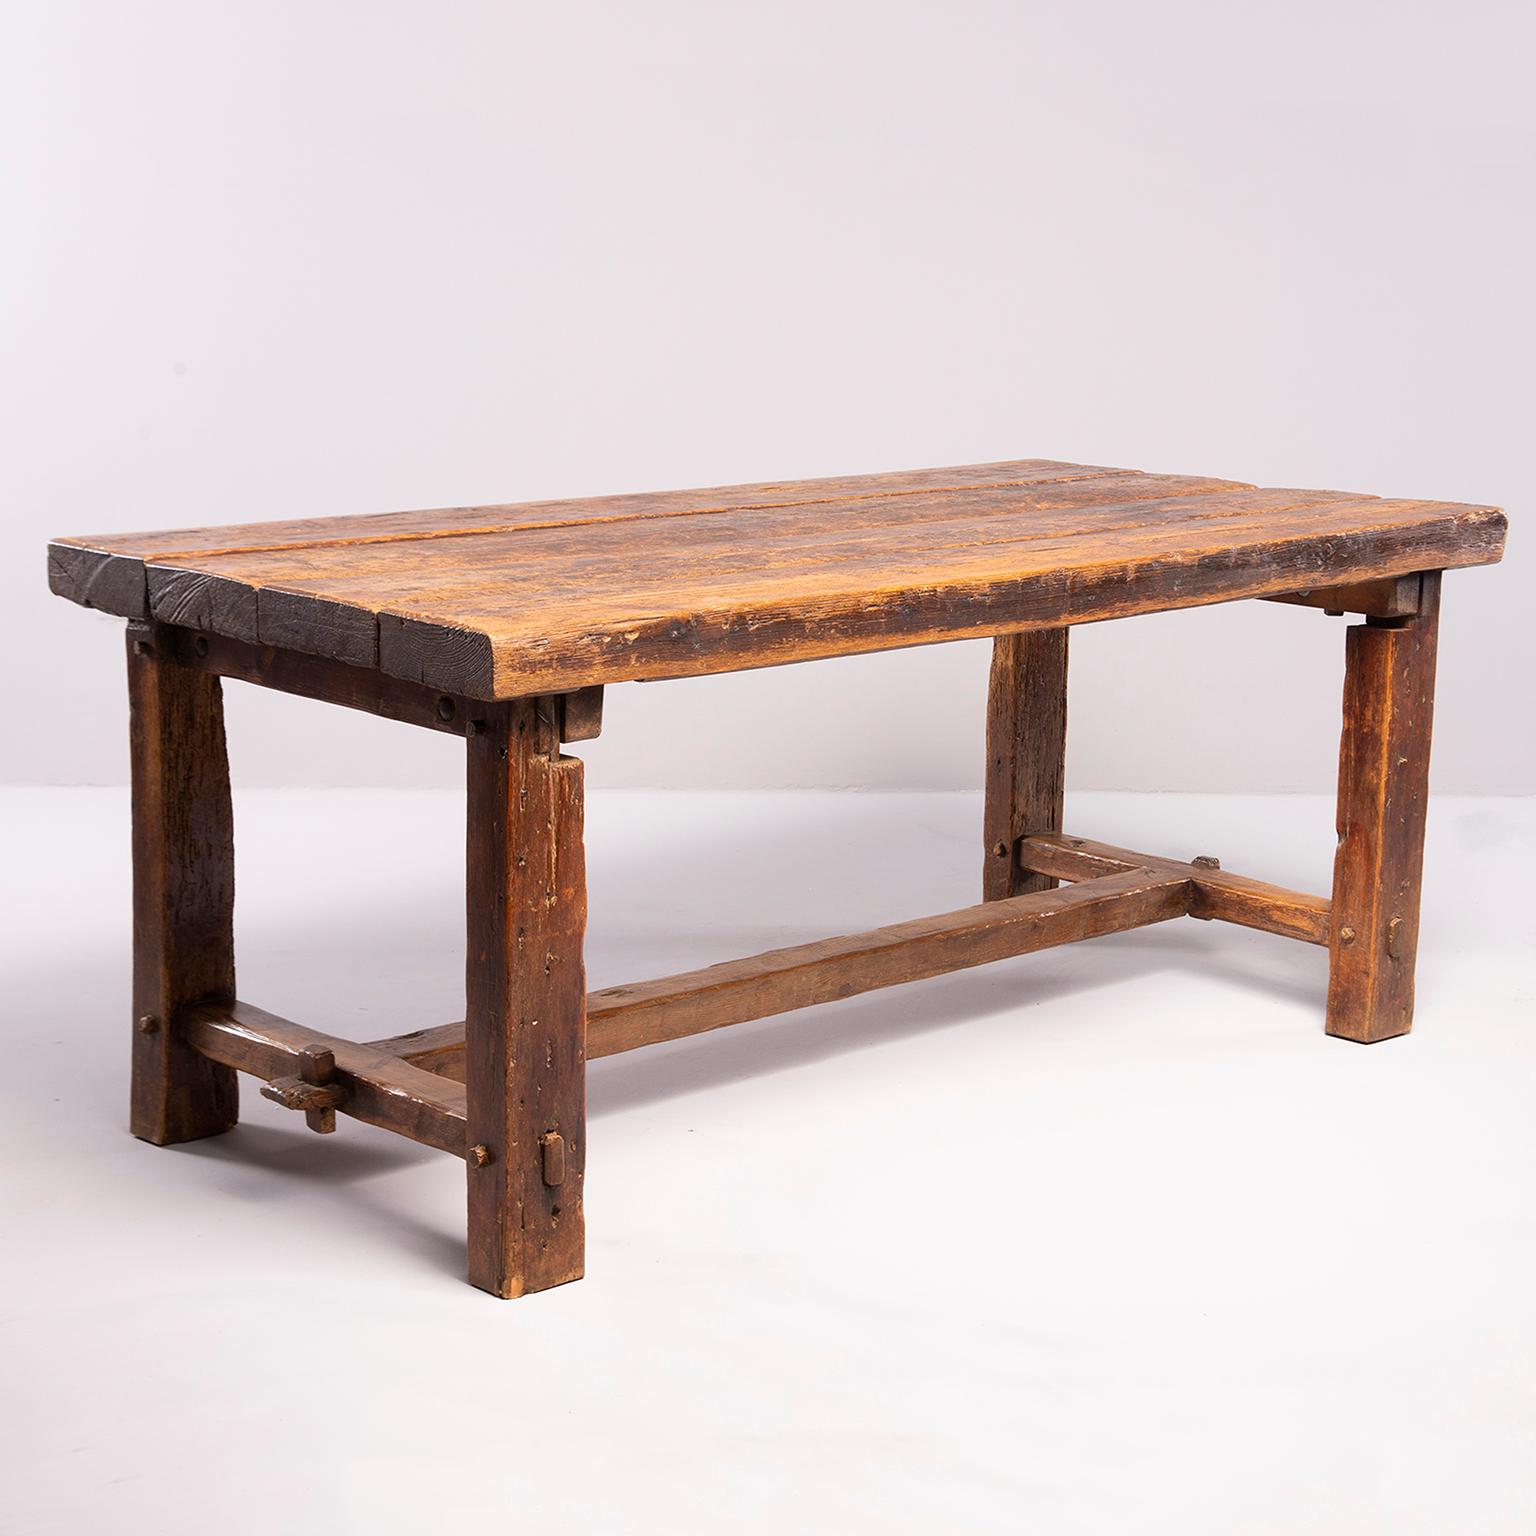 Early 19th century rustic oak table with mortise and tenon construction found in France. Four plank top. Great patina and wear.